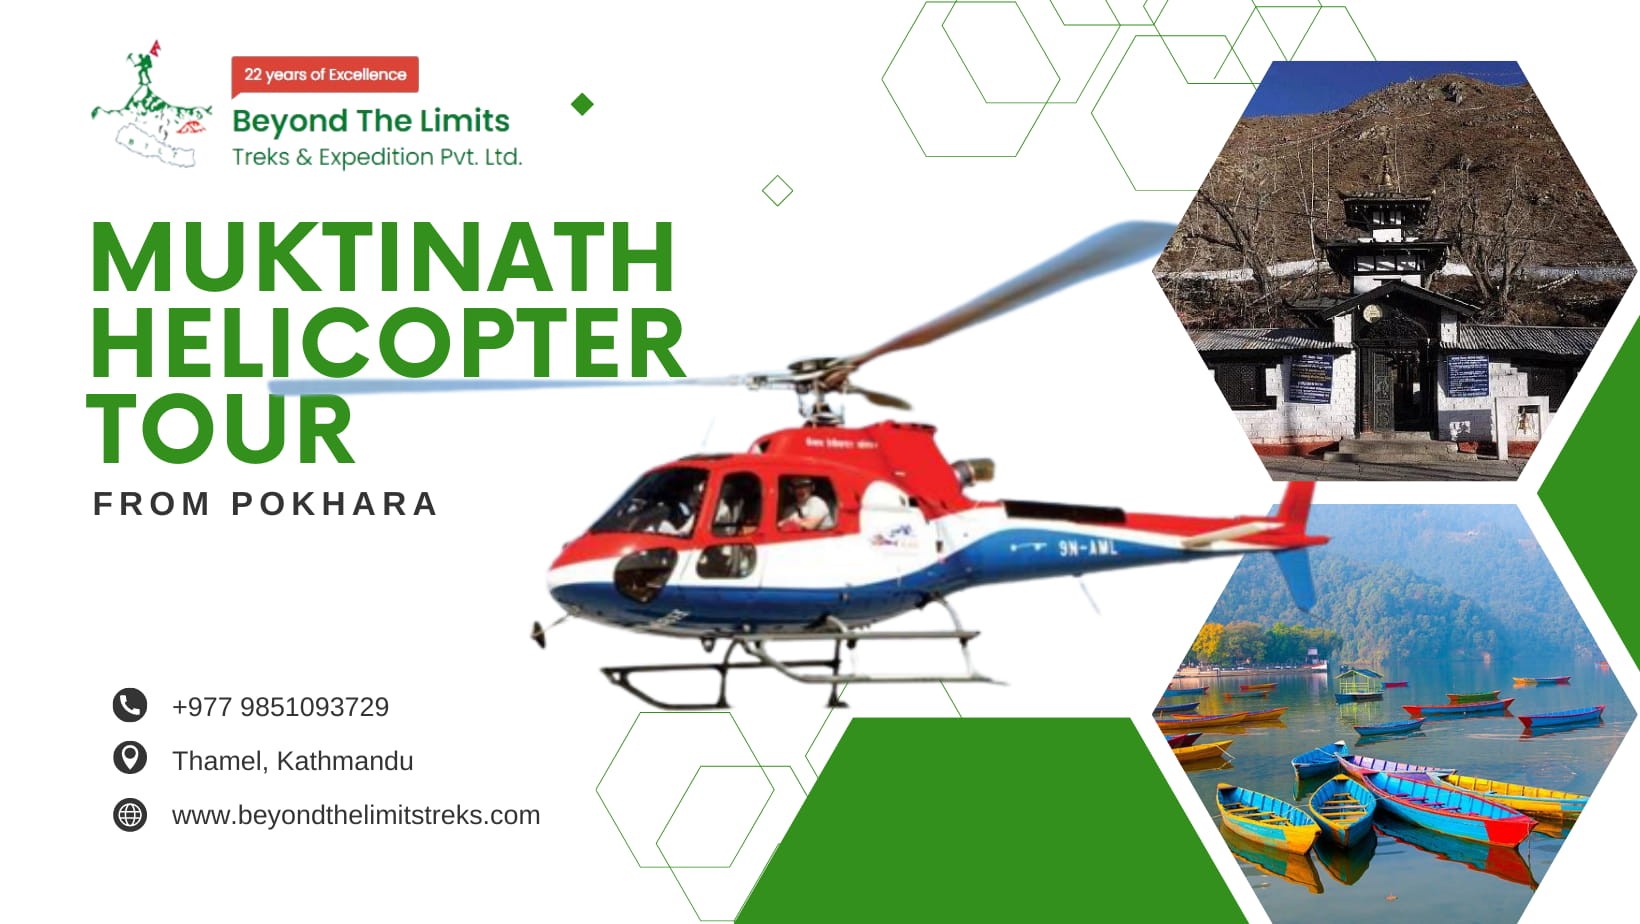 Muktinath Helicopter Tour from Pokhara